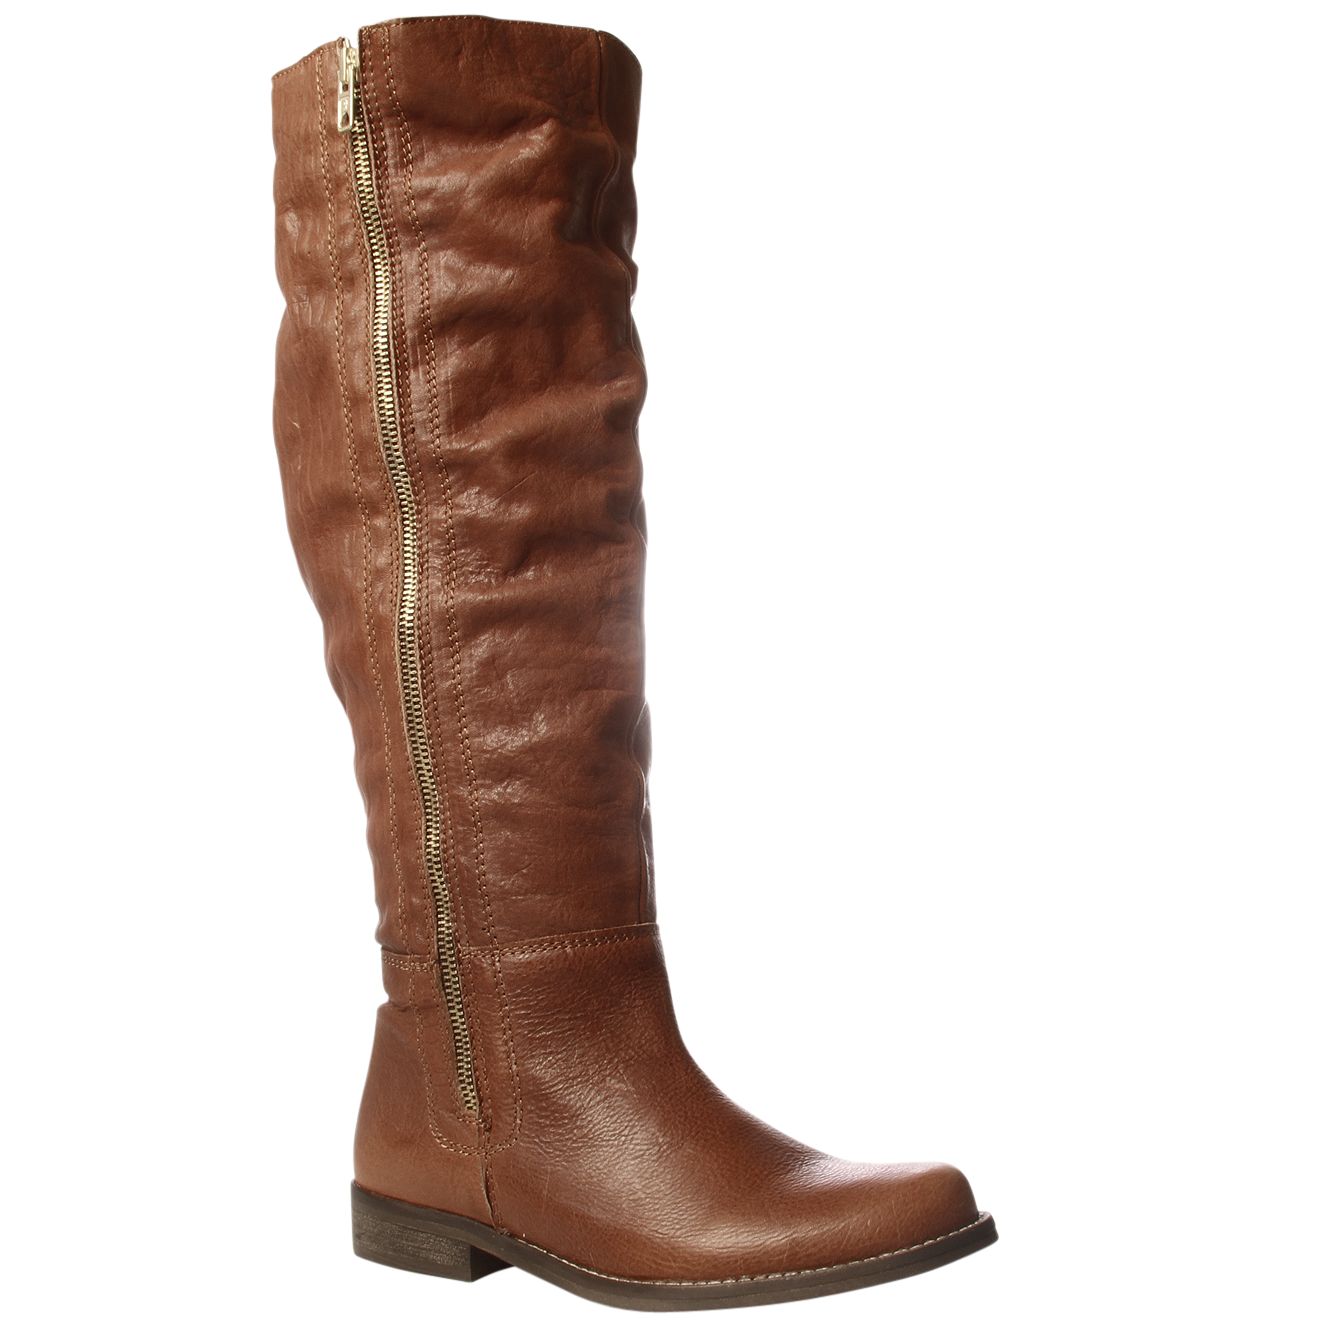 KG by Kurt Geiger Whitby Flat Leather Boots, Tan at John Lewis